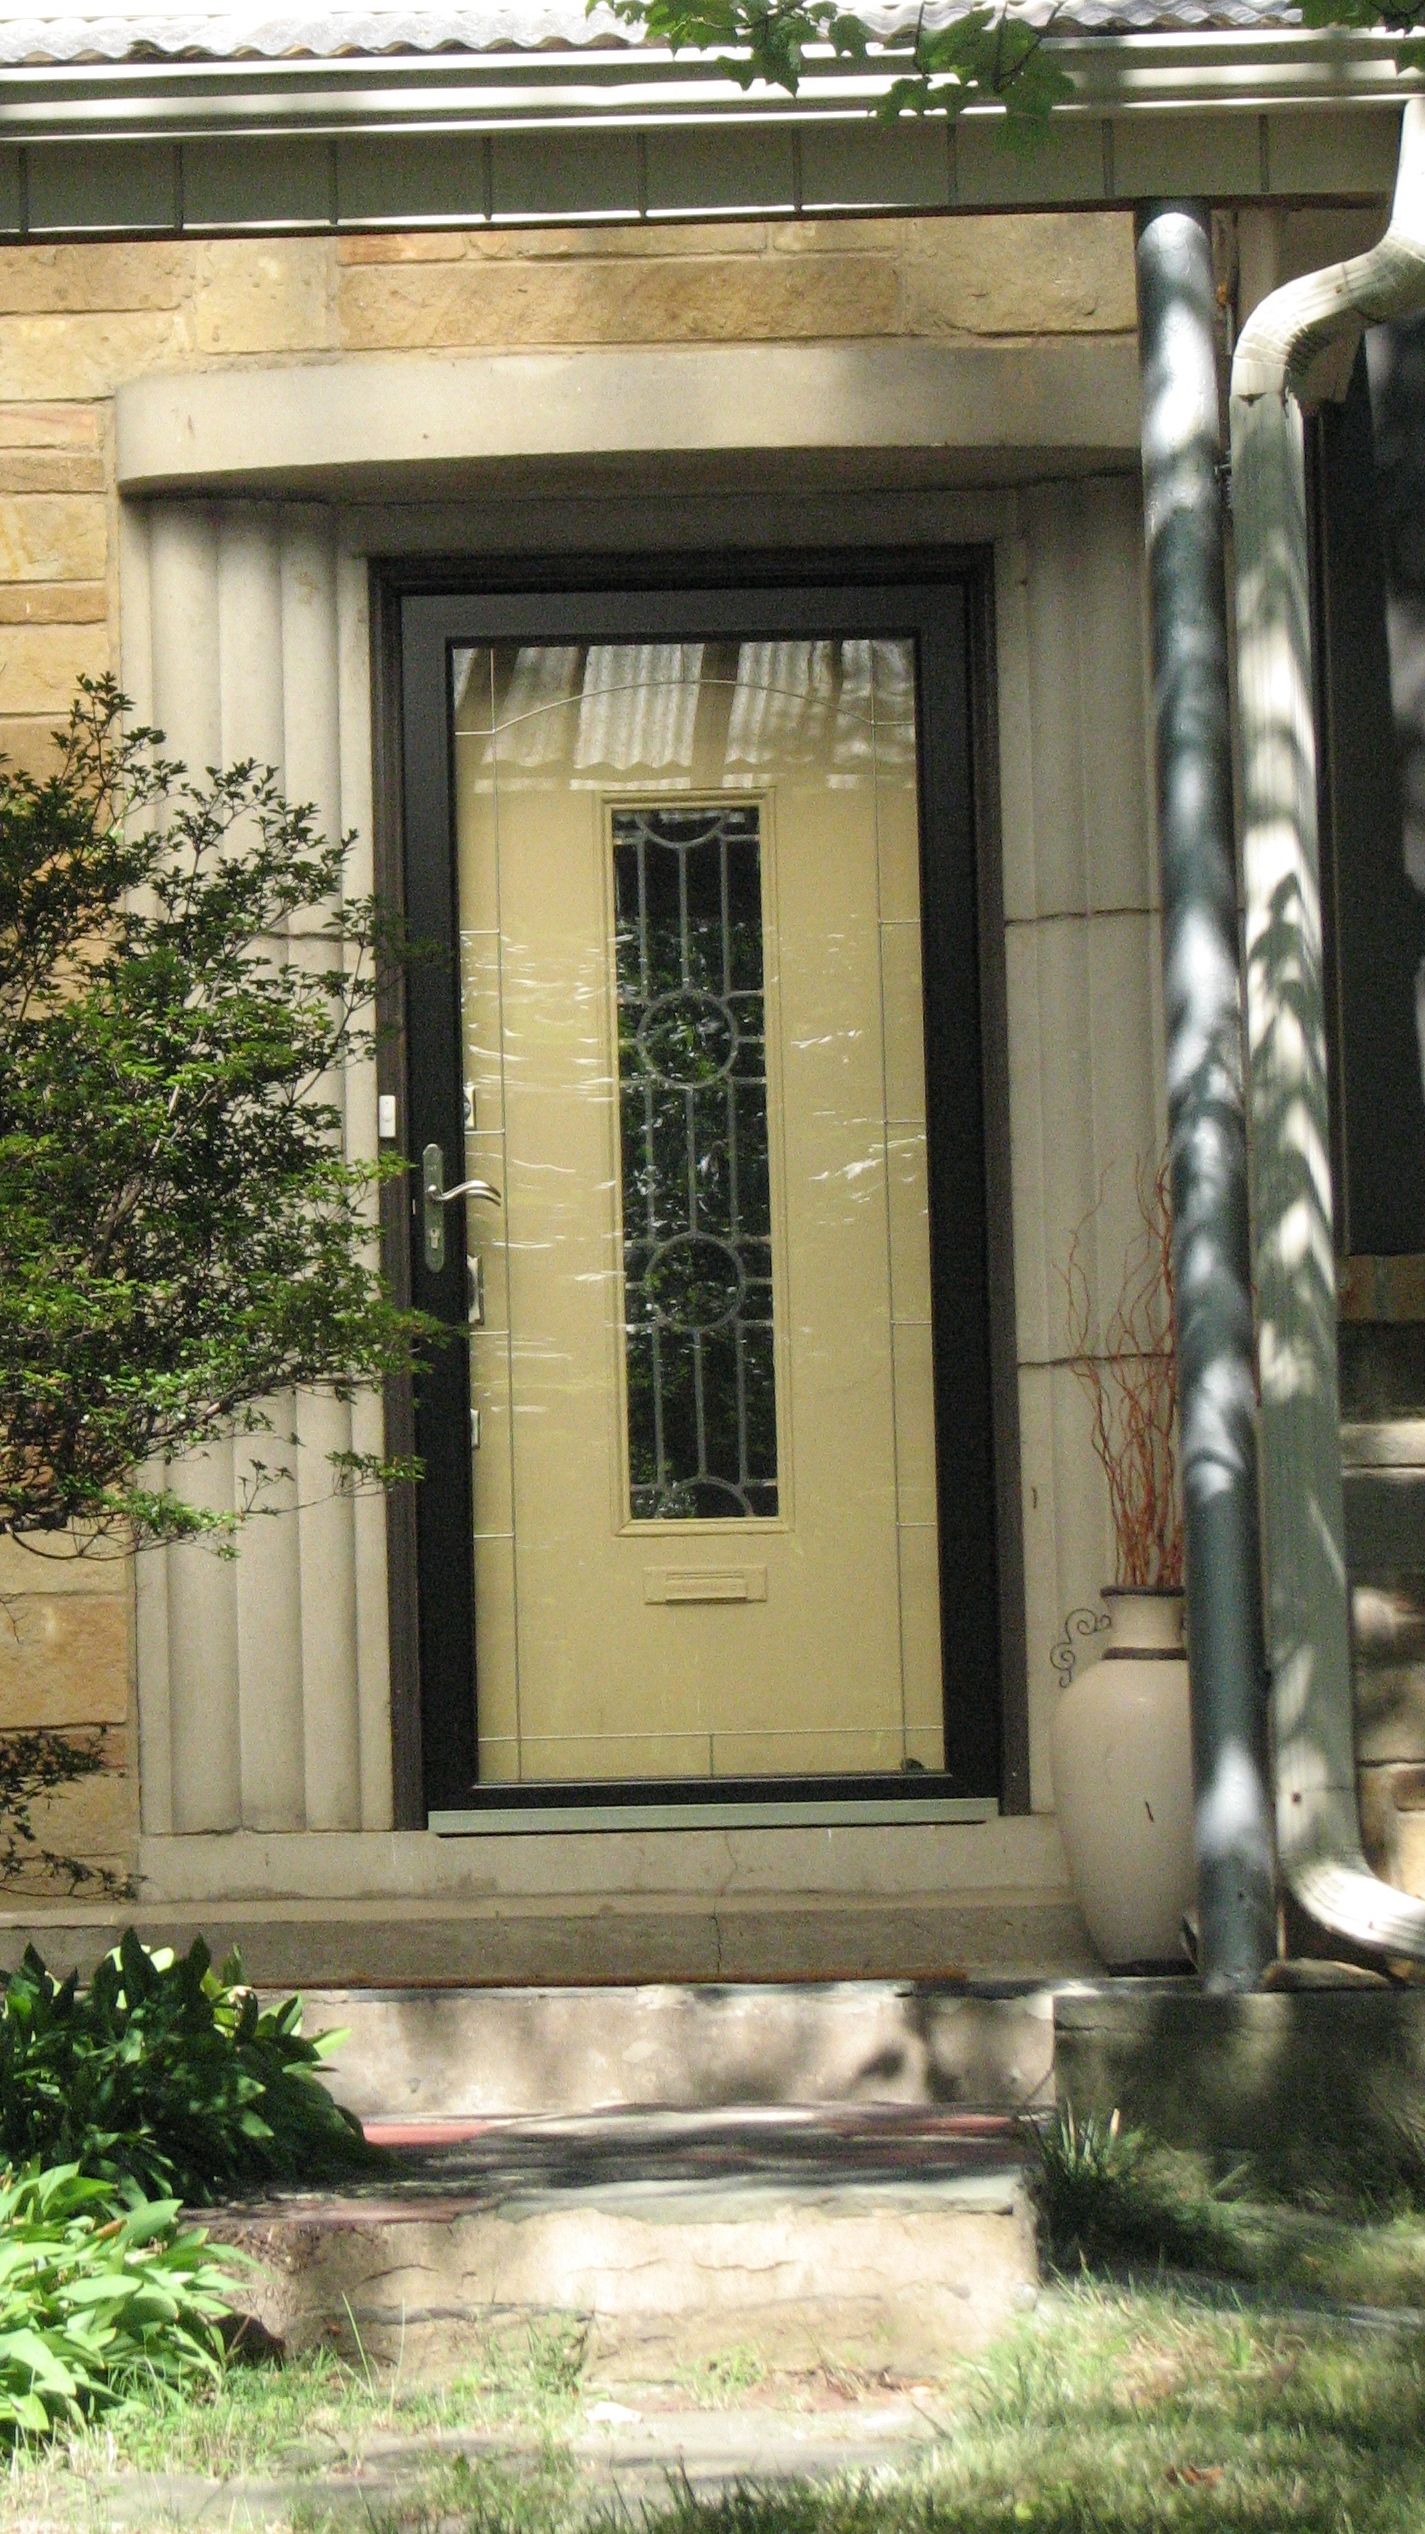 The Art Deco-style portico and line-and-circle glass design have survived on several homes.